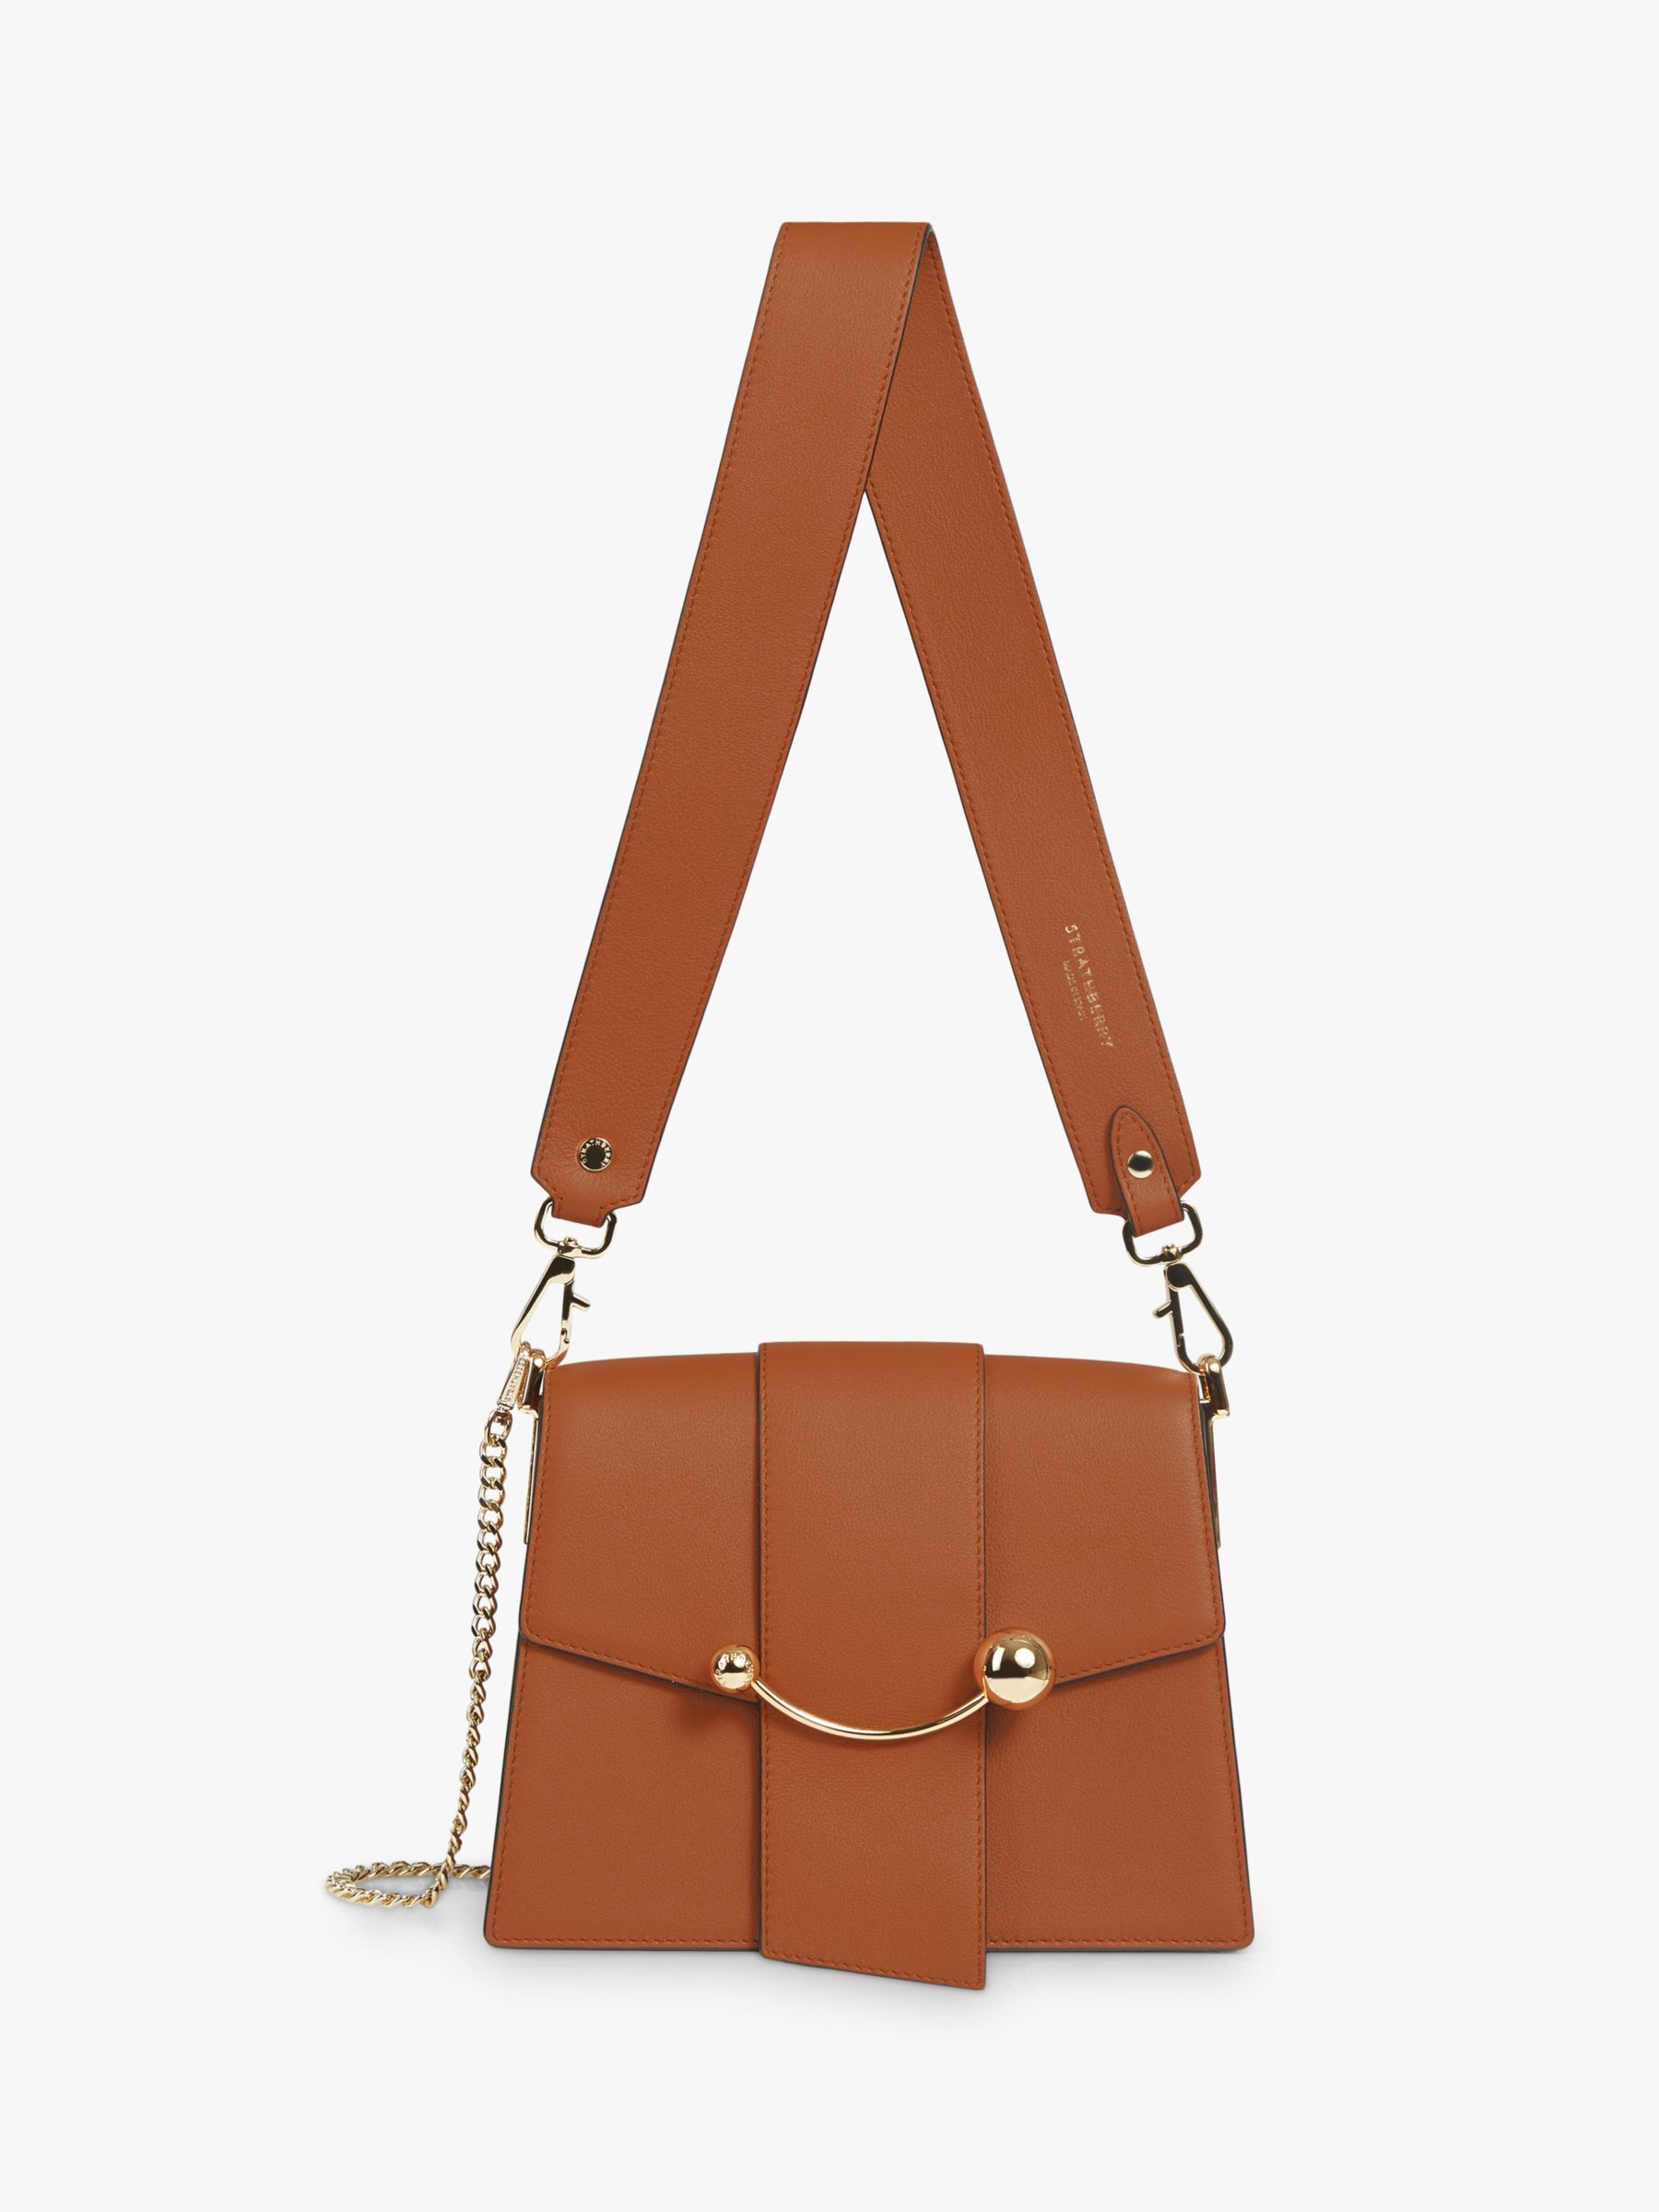 Strathberry Women's Mini Leather Shoulder Bag - Chestnut One-Size